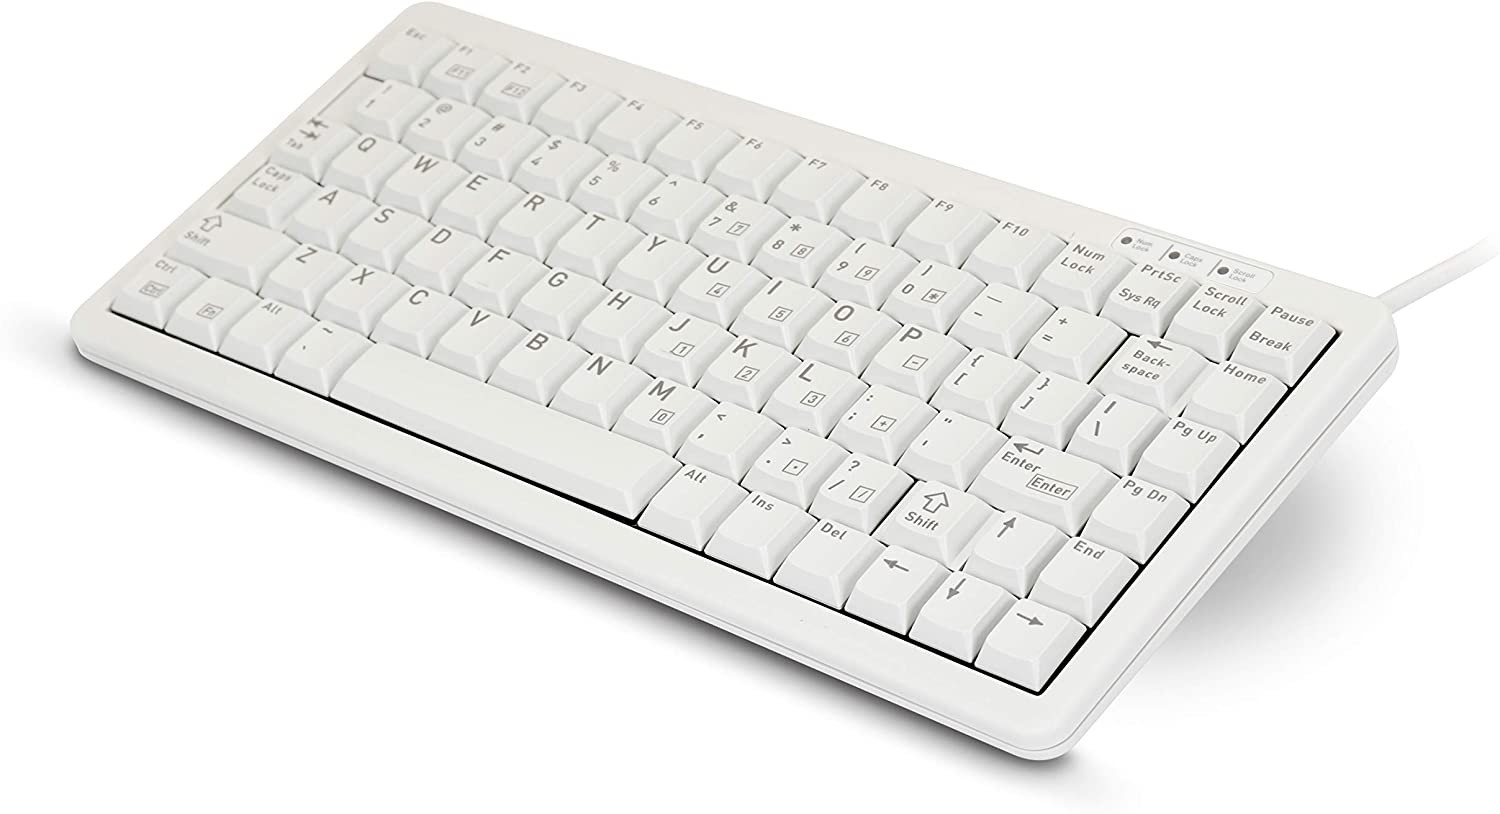 Cherry G84-4100 Wired USB/PS2 Compact-Keyboard Light Gray English G84-4100LCMUS-0